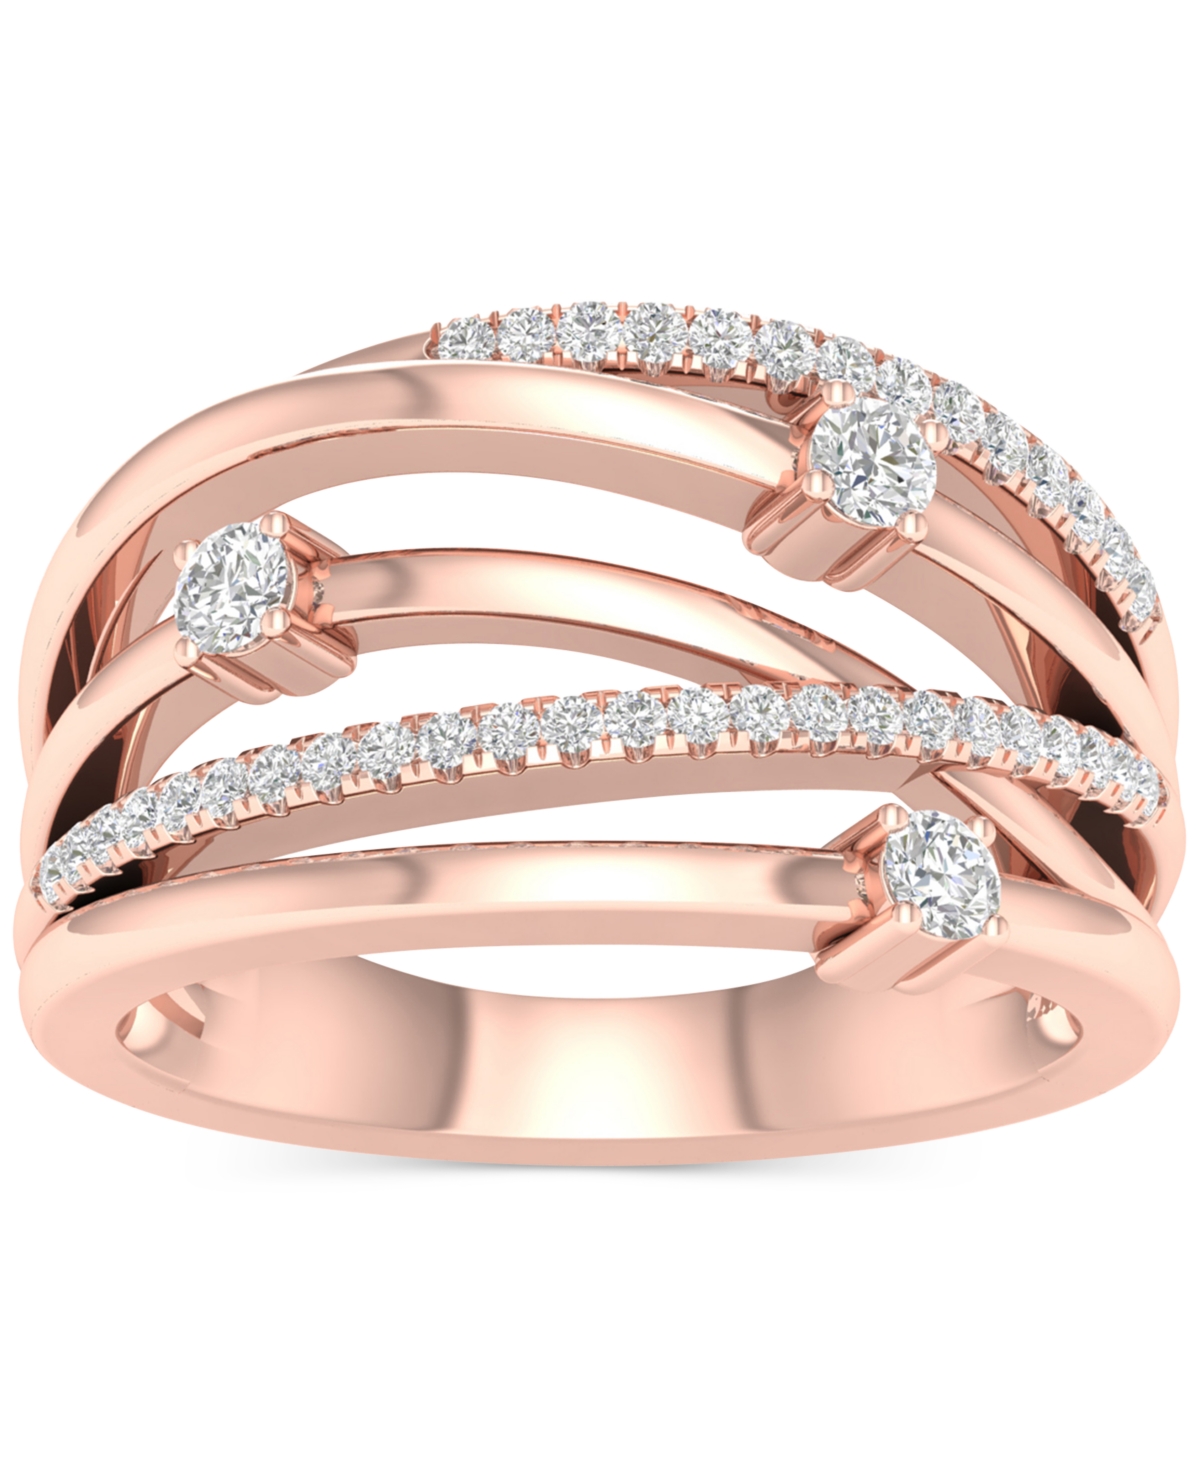 Diamond Multirow Crossover Statement Ring (1/3 ct. t.w.) in 10k Rose Gold - Rose Gold